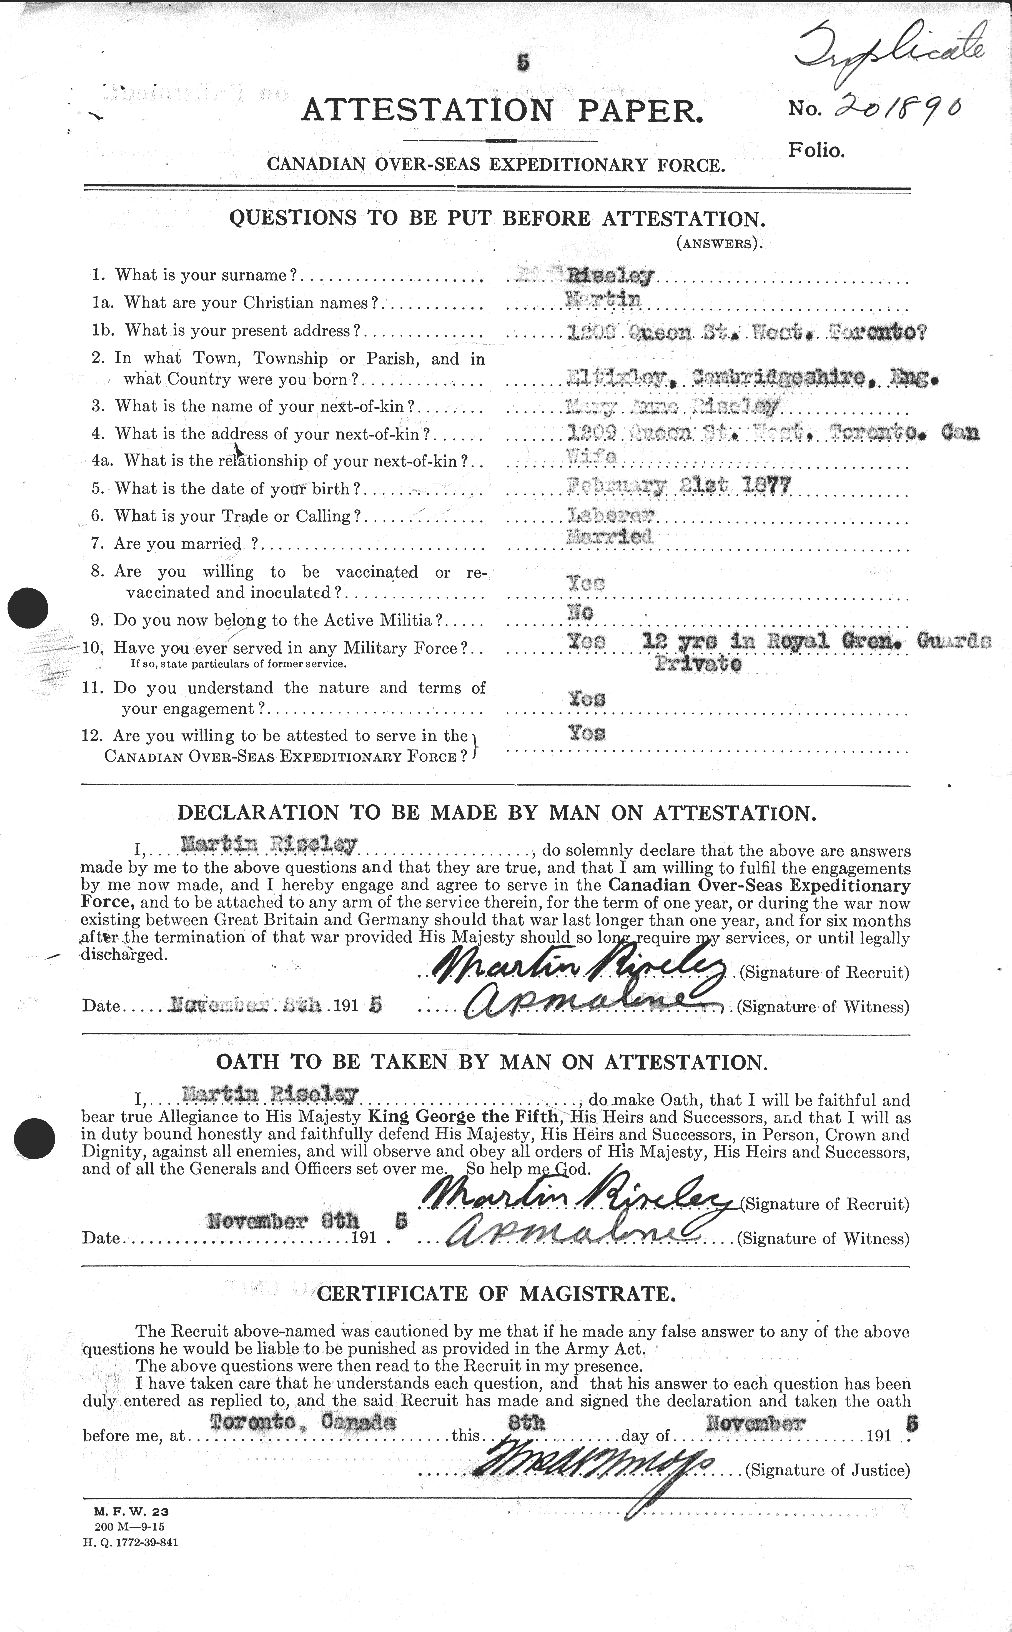 Personnel Records of the First World War - CEF 601314a